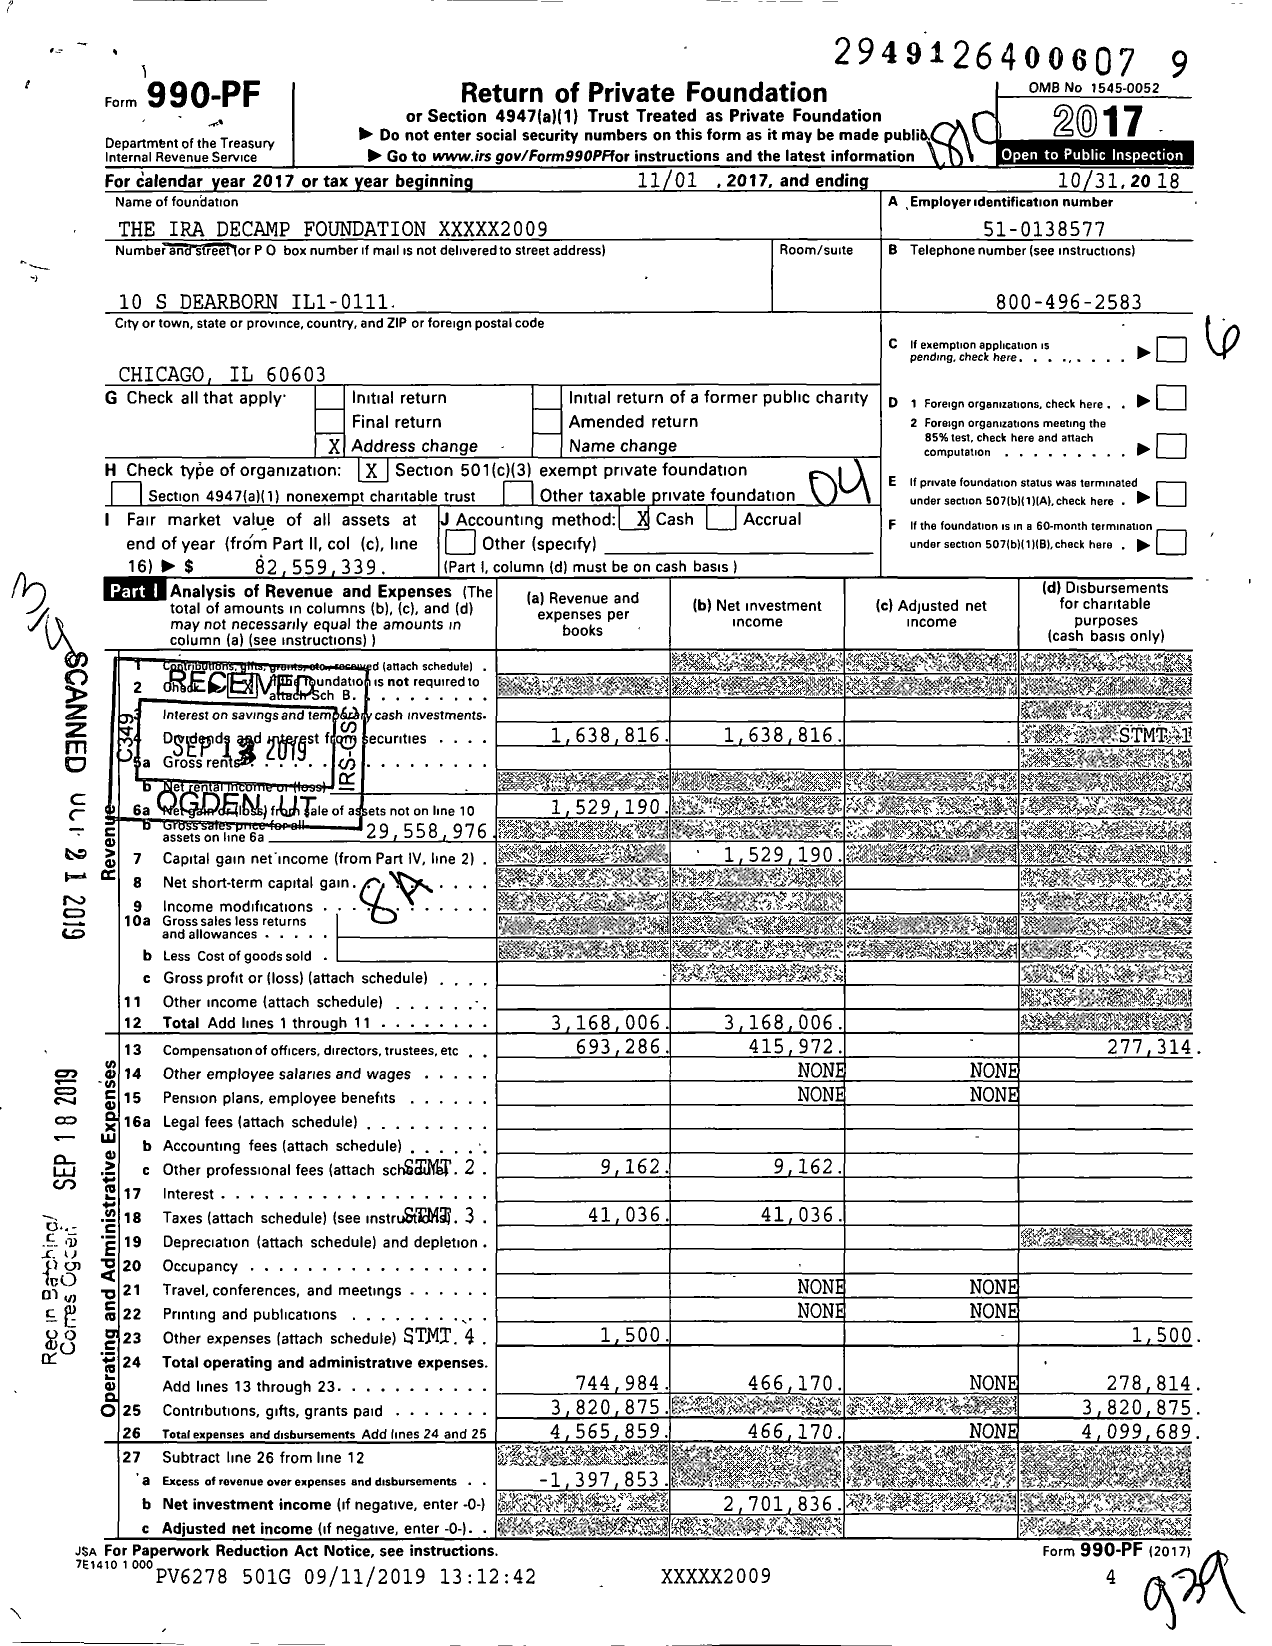 Image of first page of 2017 Form 990PF for Ira Decamp Foundation Under the Will of Elizabeth Decamp Mcinerny